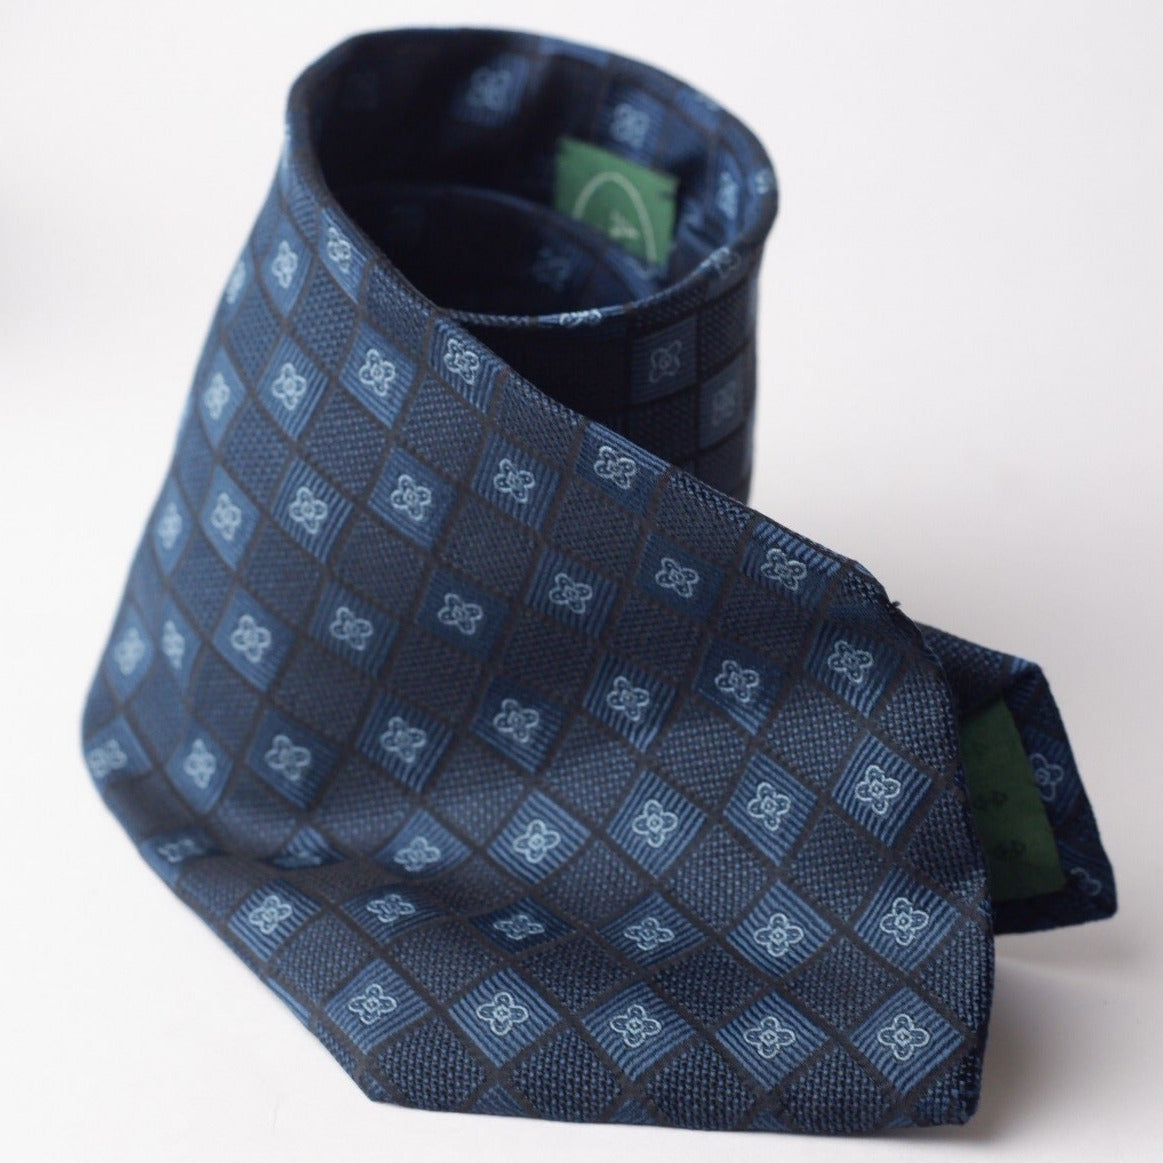 Andrew's Ties Navy with Square and Clover Pattern Necktie